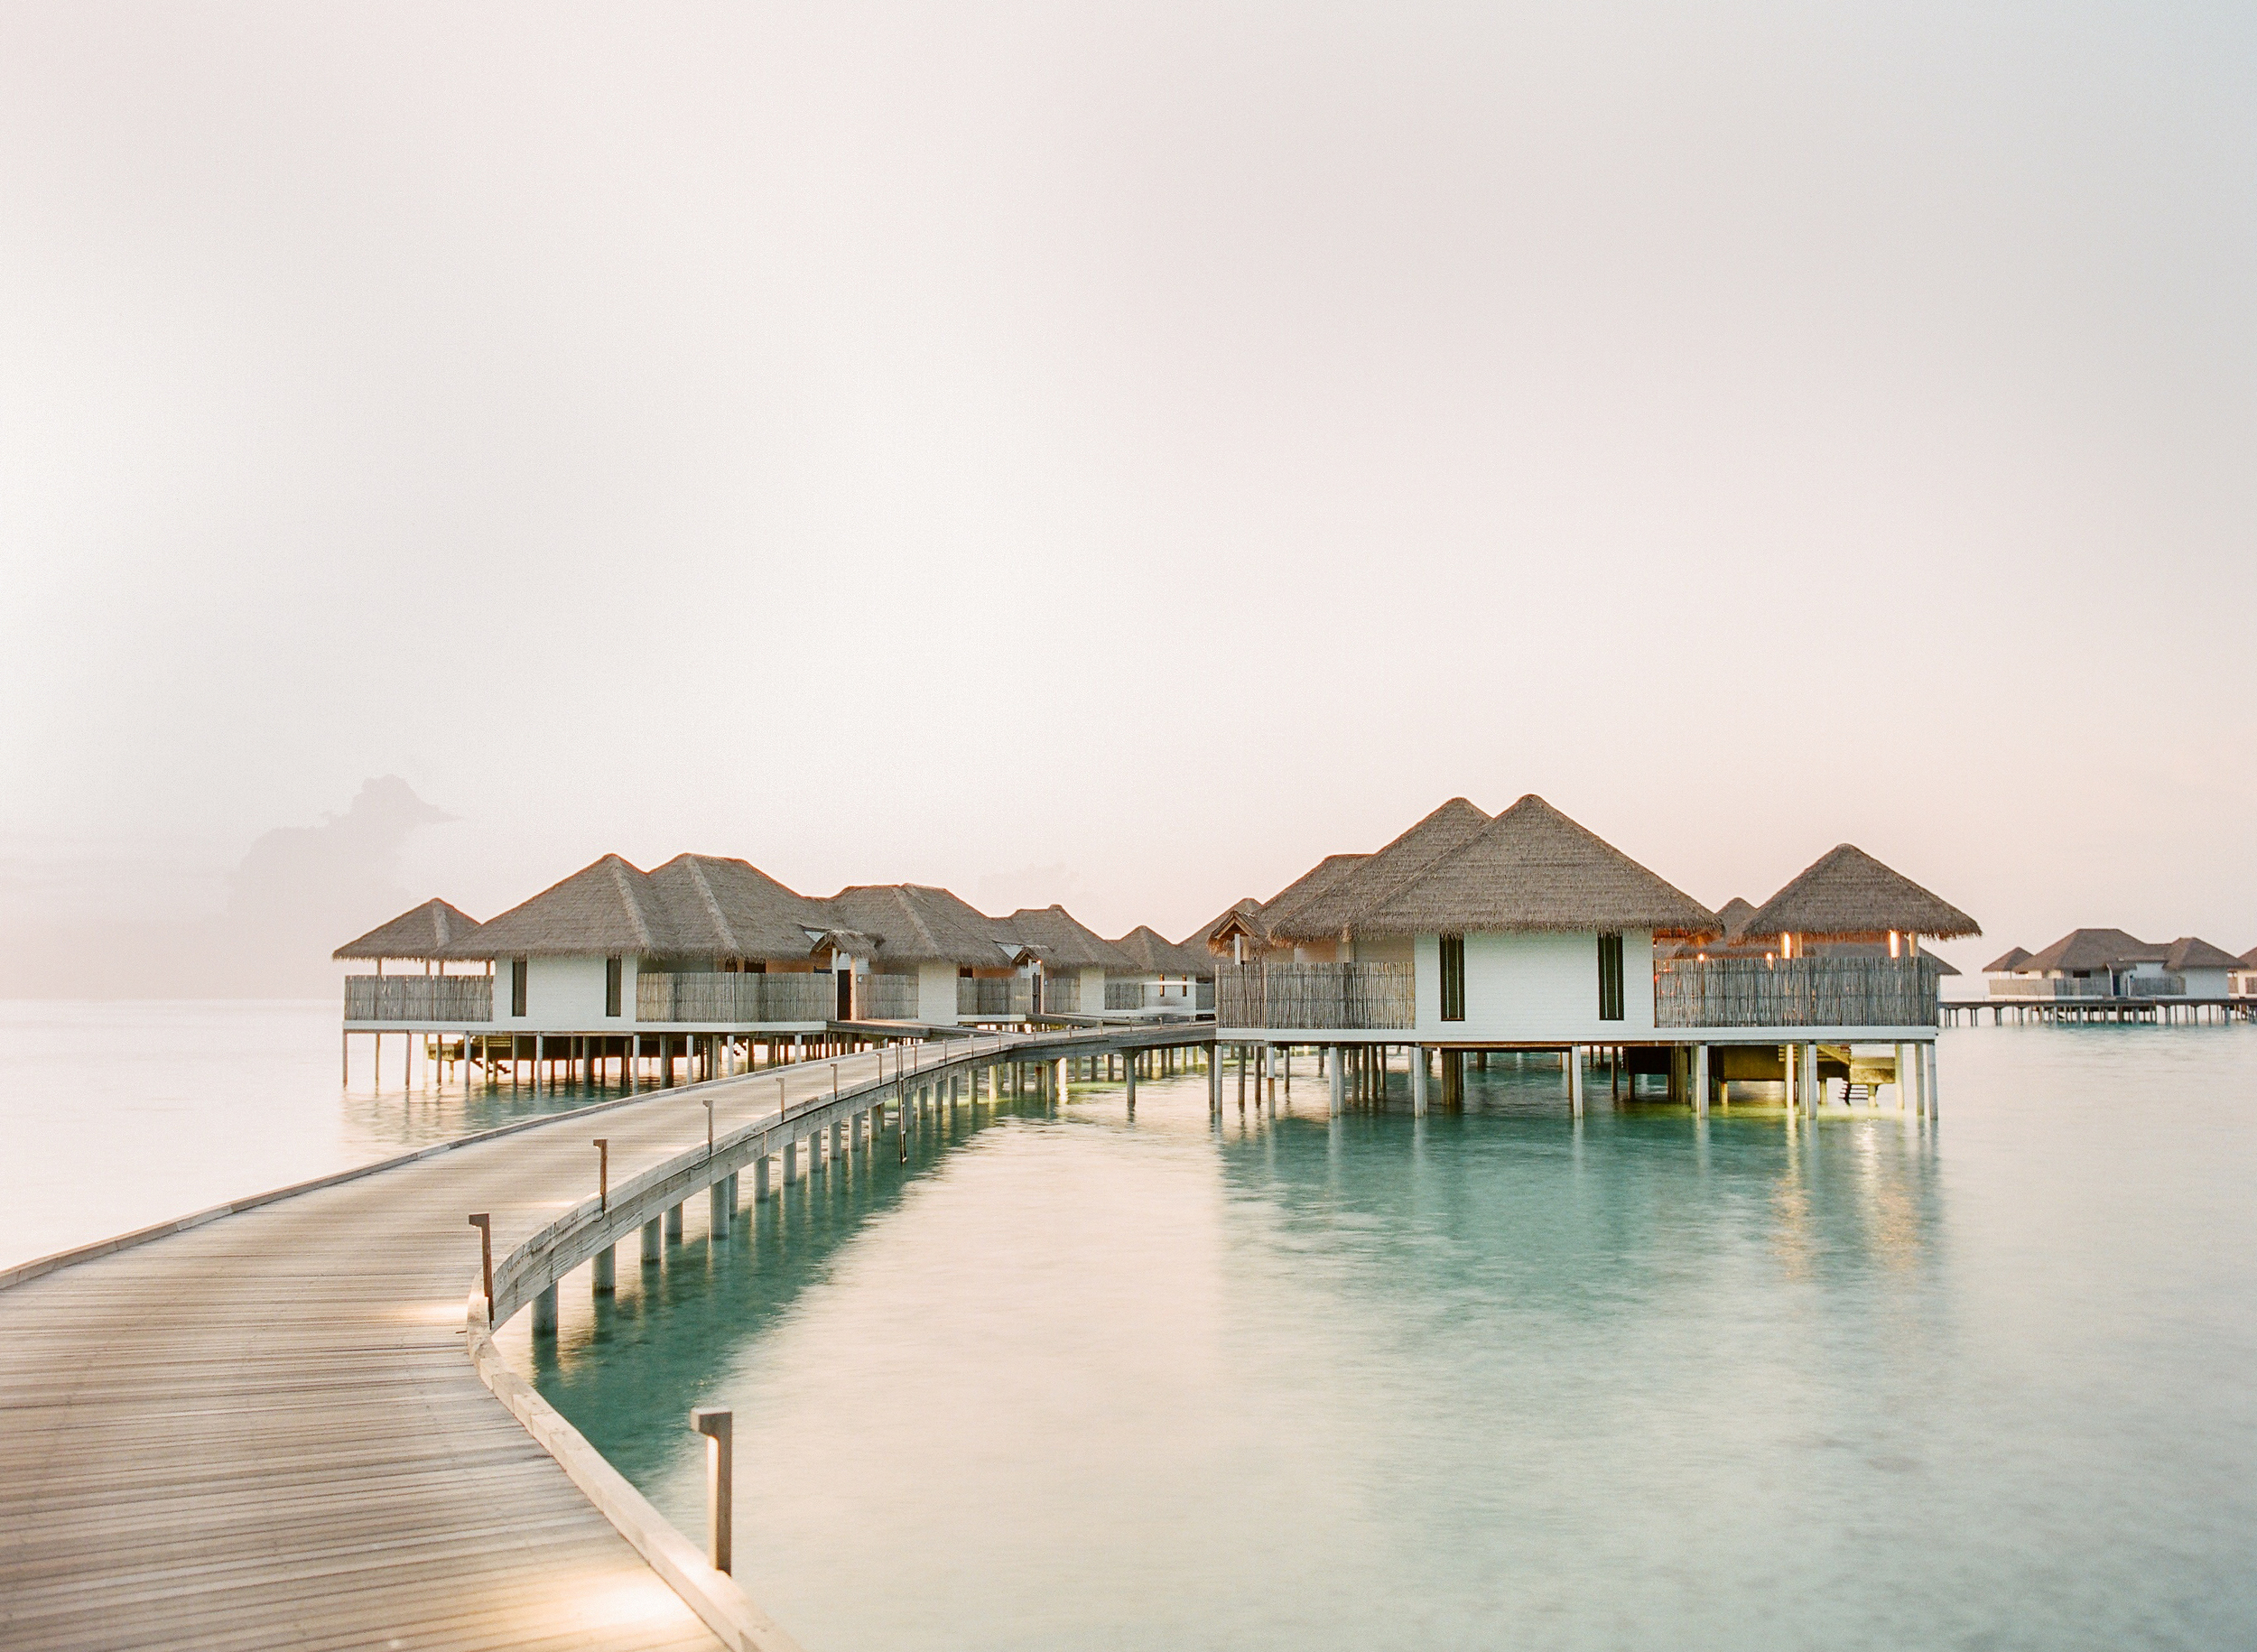 The Four Seasons in the Maldives